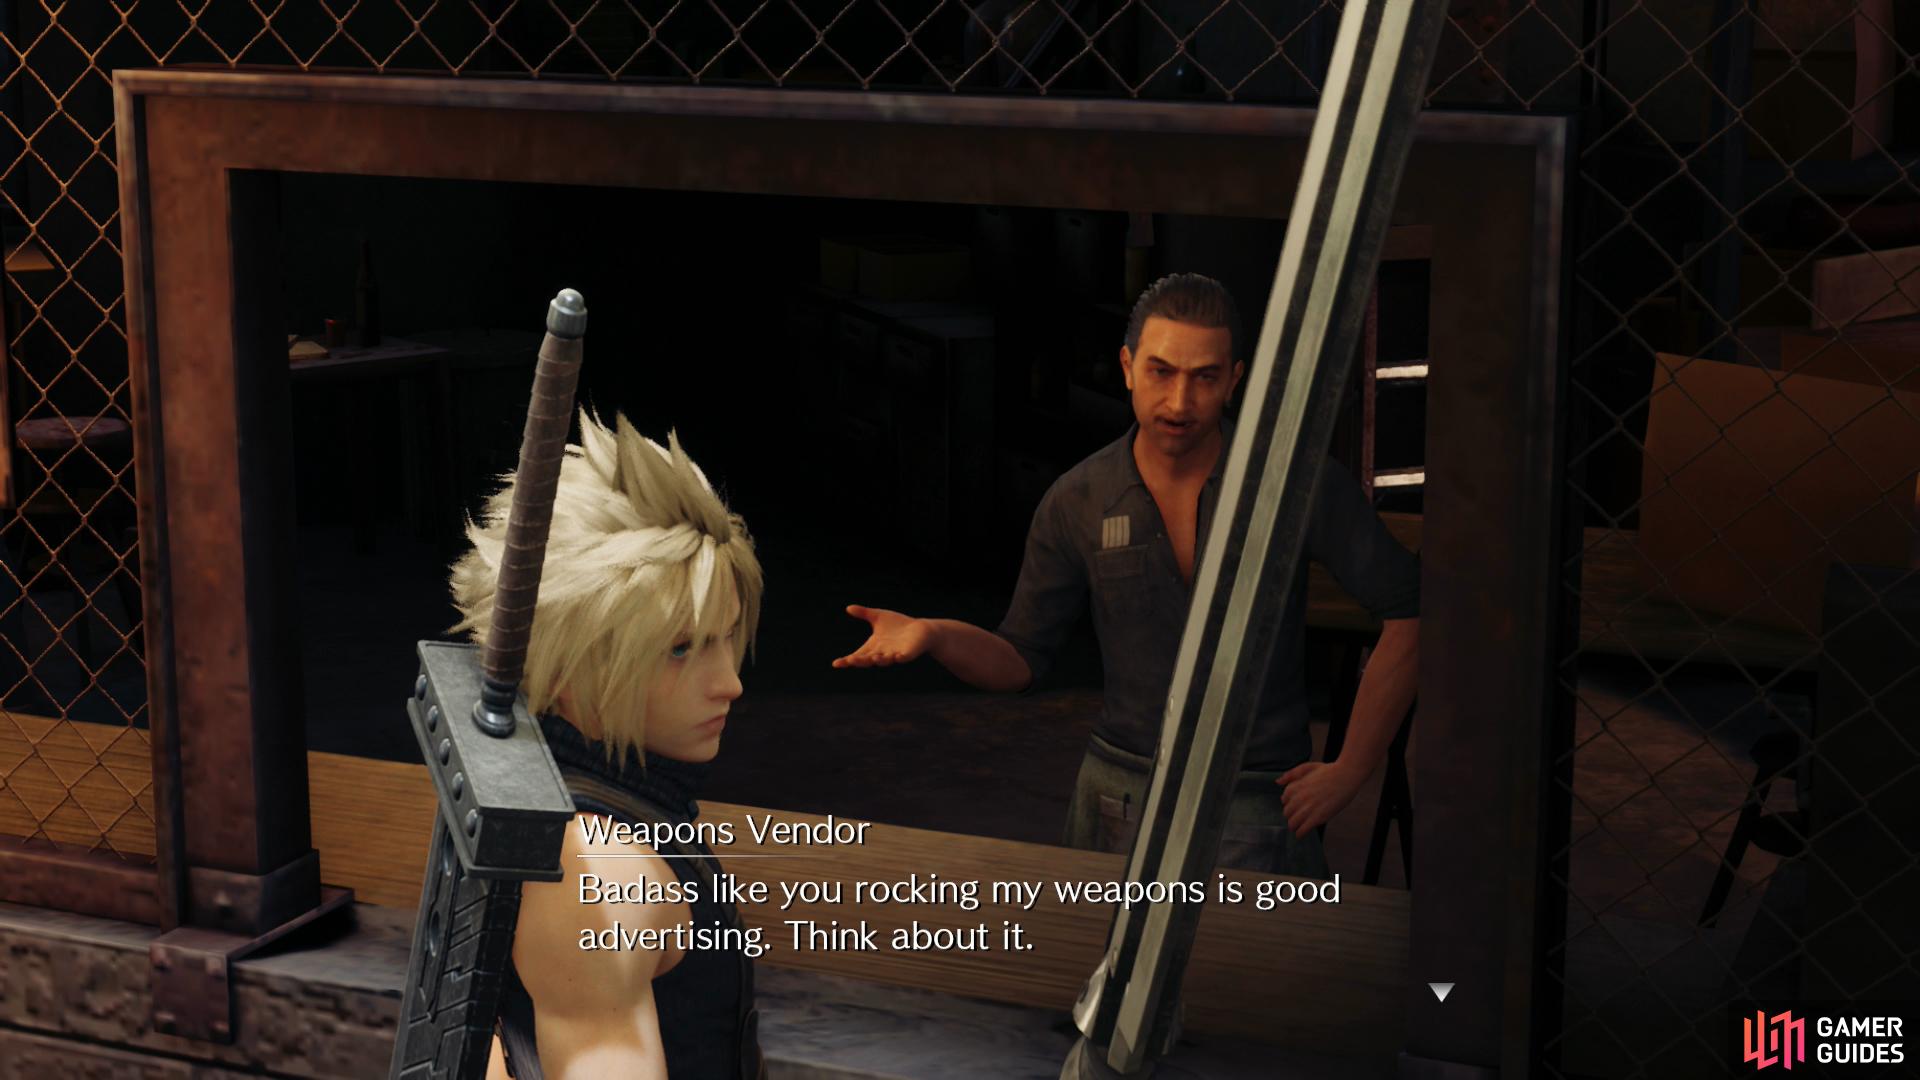 Talk to the owner of the Weapon Shop and he'll make peace by giving you a new weapon.